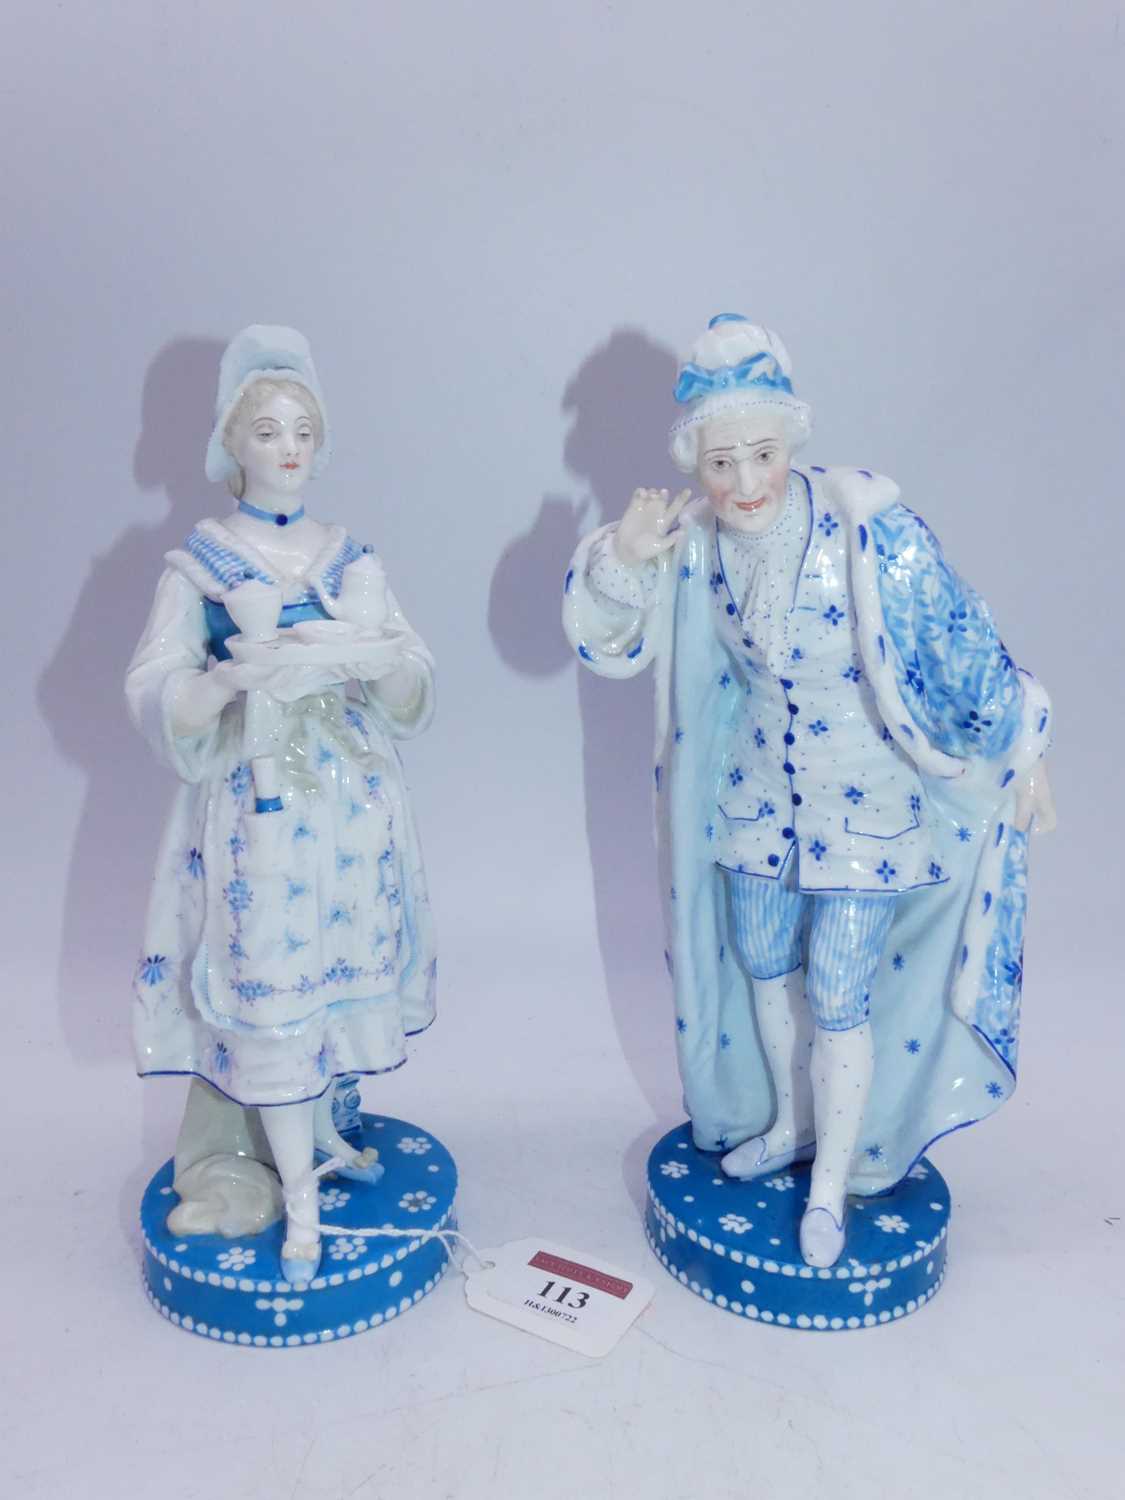 A pair of late 19th century French Vion & Baury porcelain figures, the lady in standing pose holding